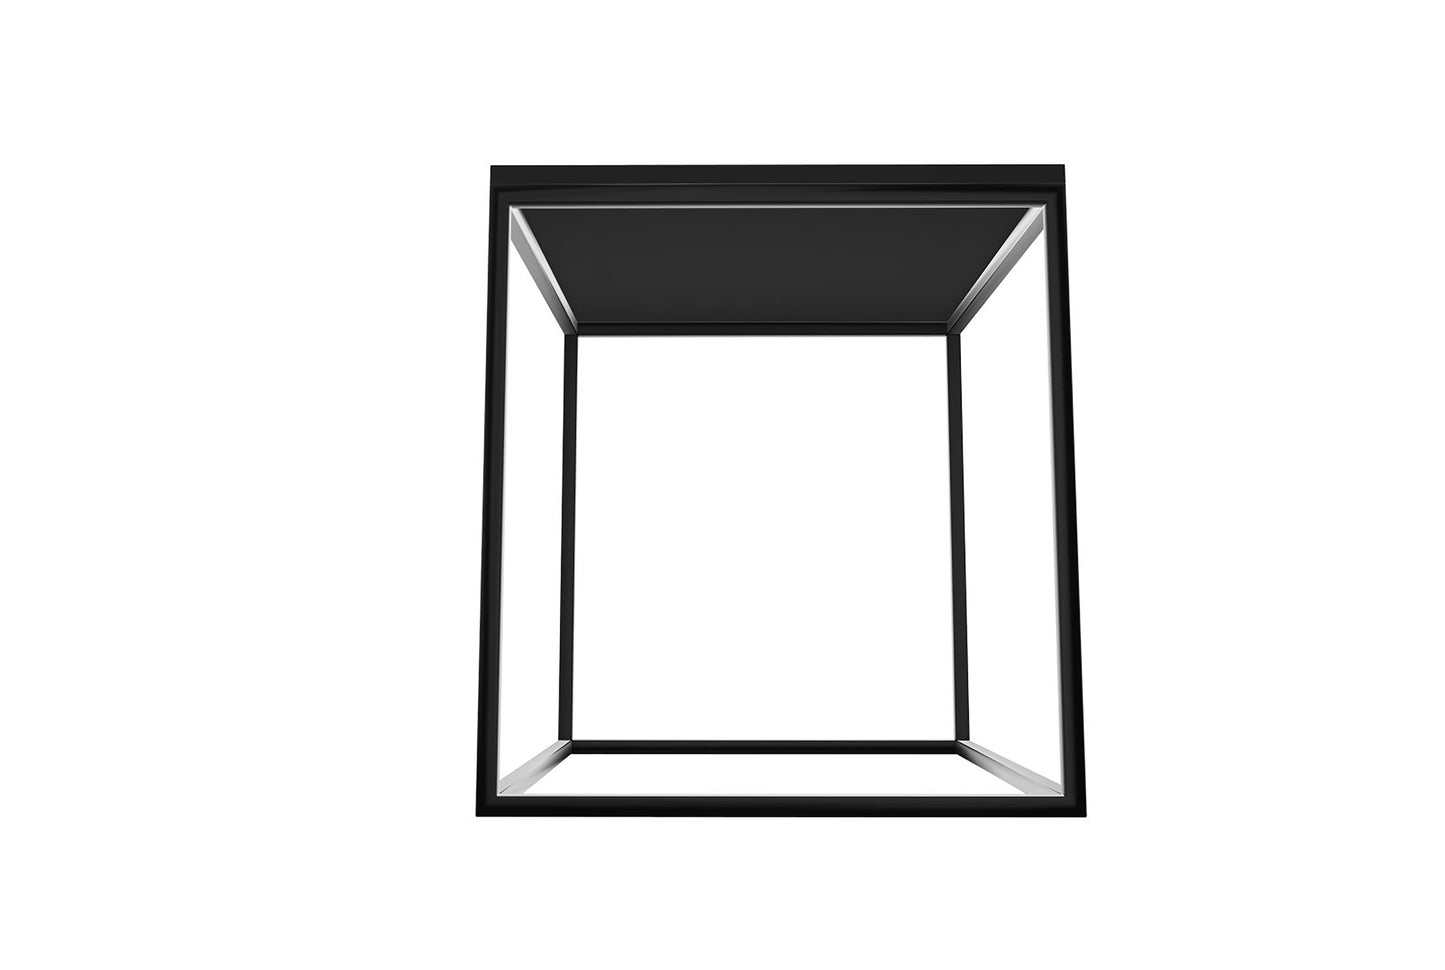 HomeRoots 18" Acrylic Contempo Square Coffee Table With Black and White Finish